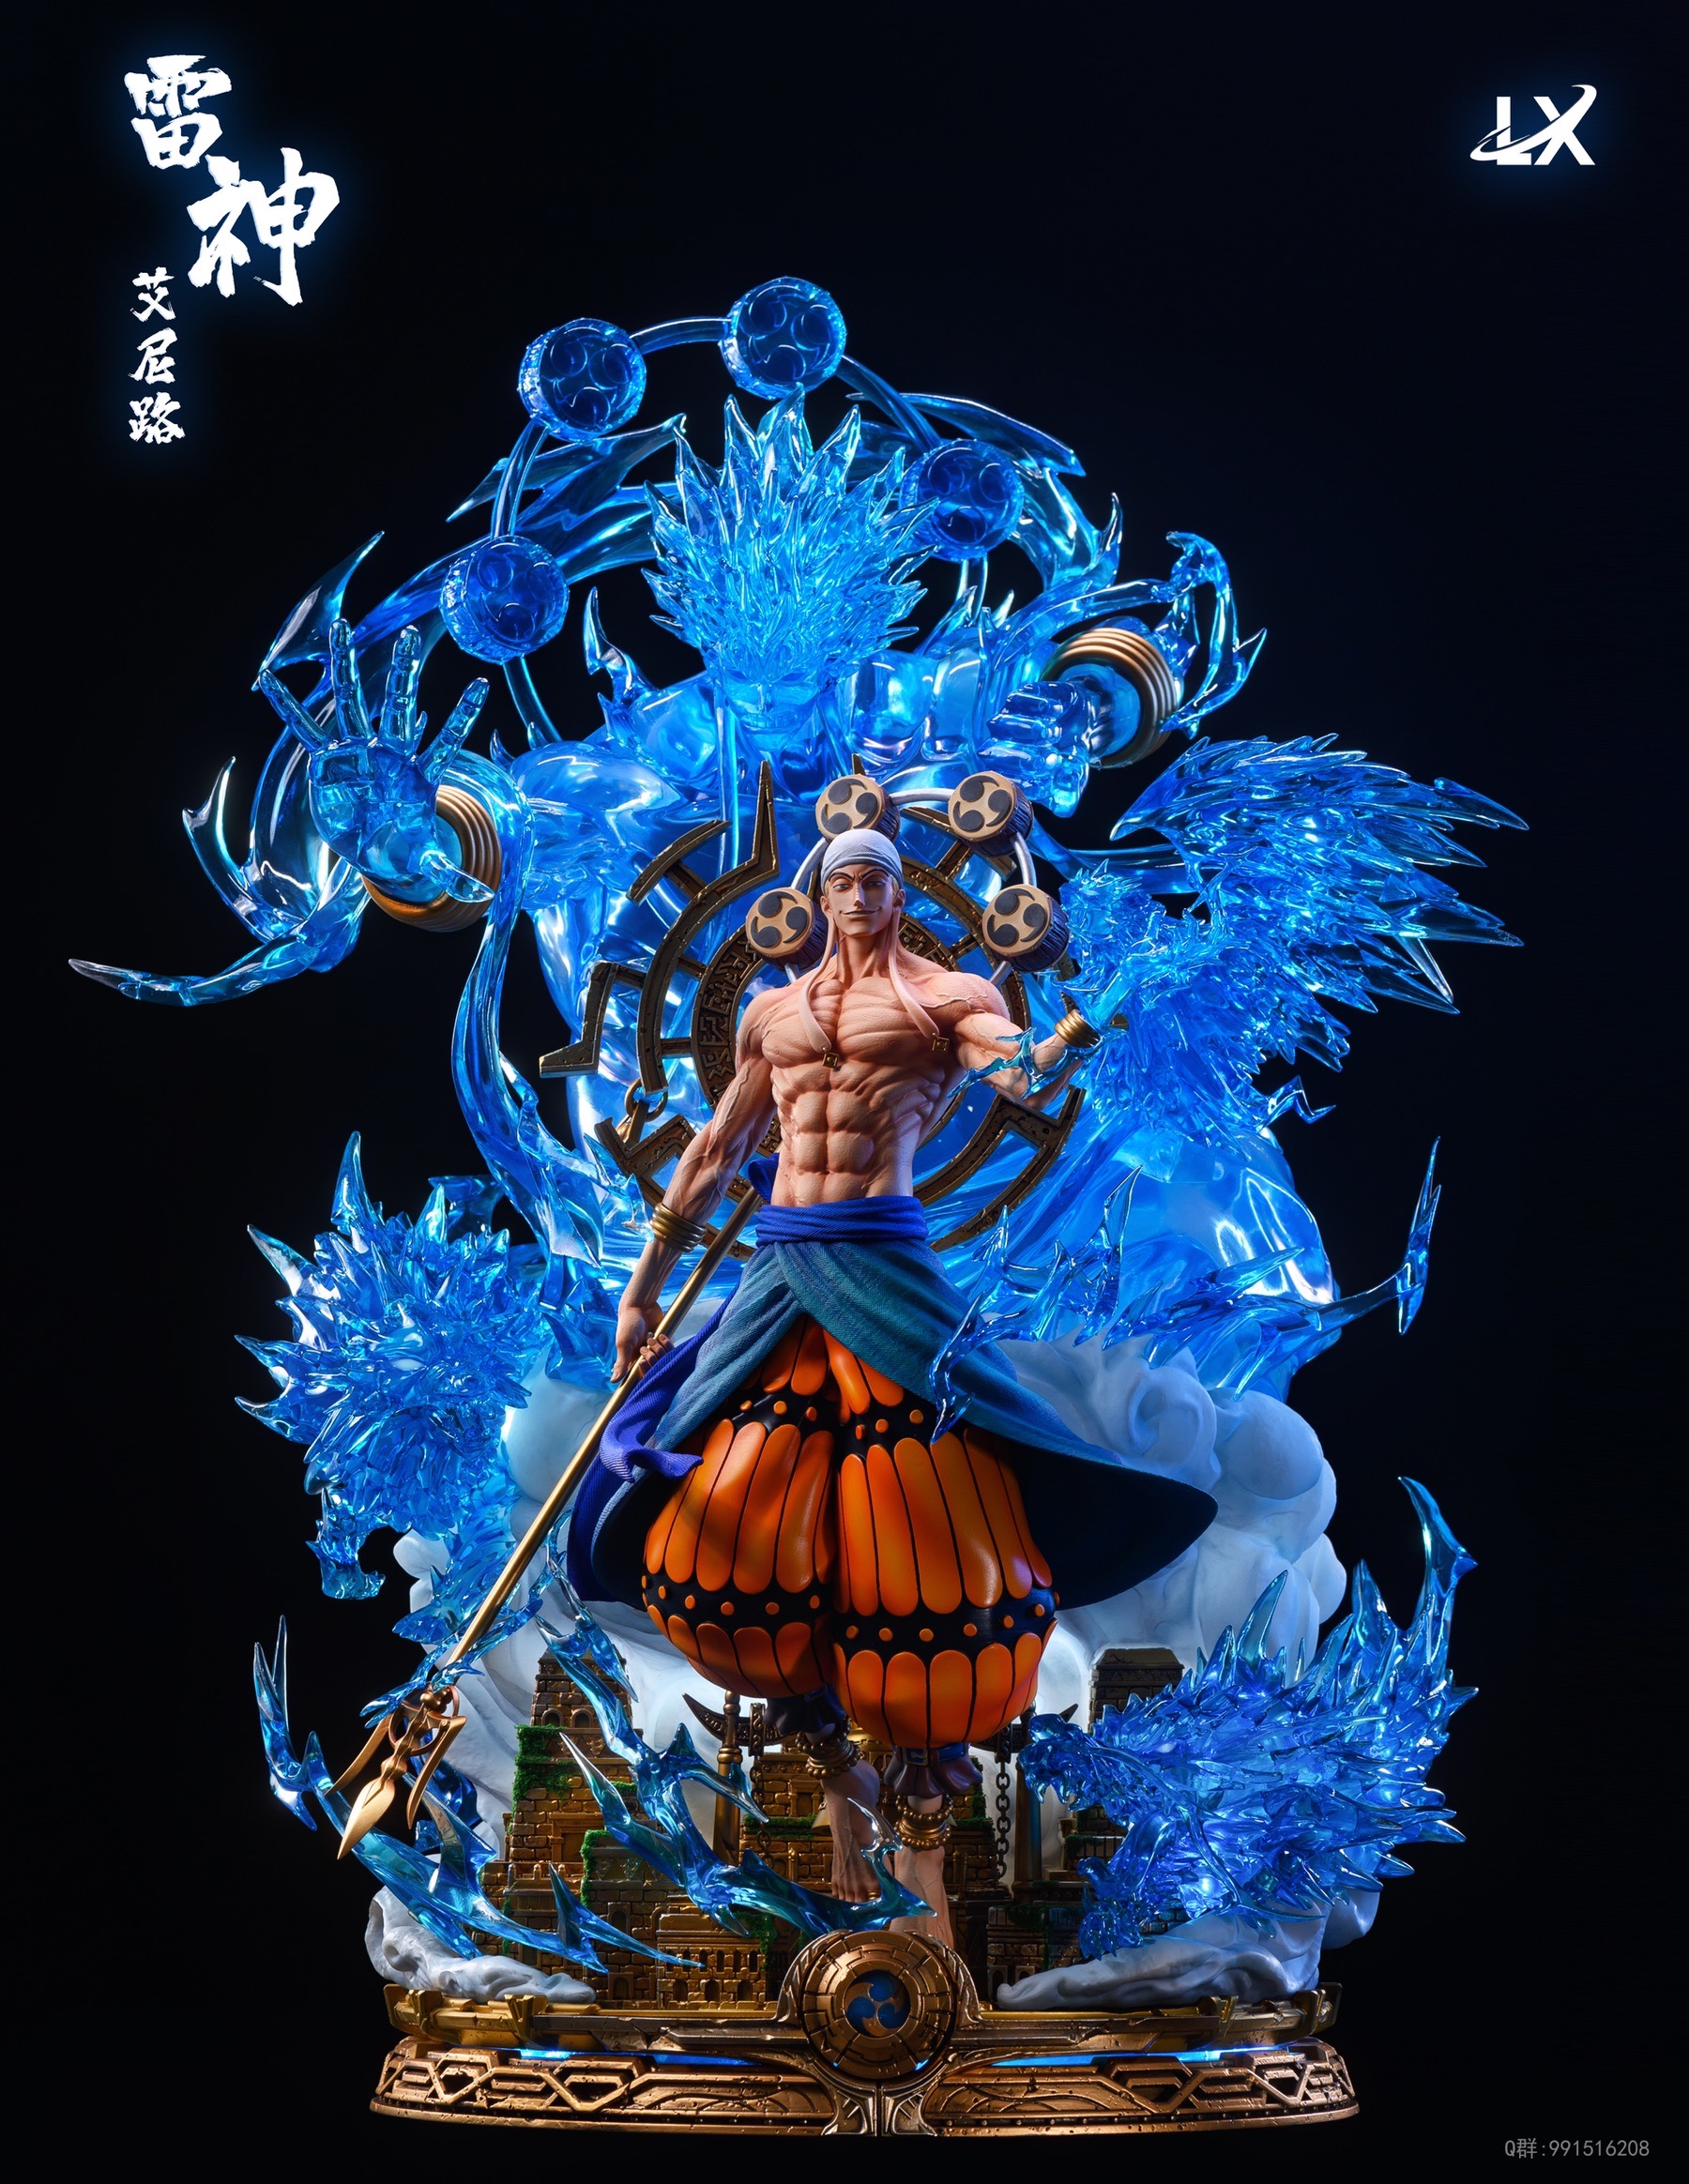 The God Enel เอเนล by LX Studio (มัดจำ) [[SOLD OUT]]